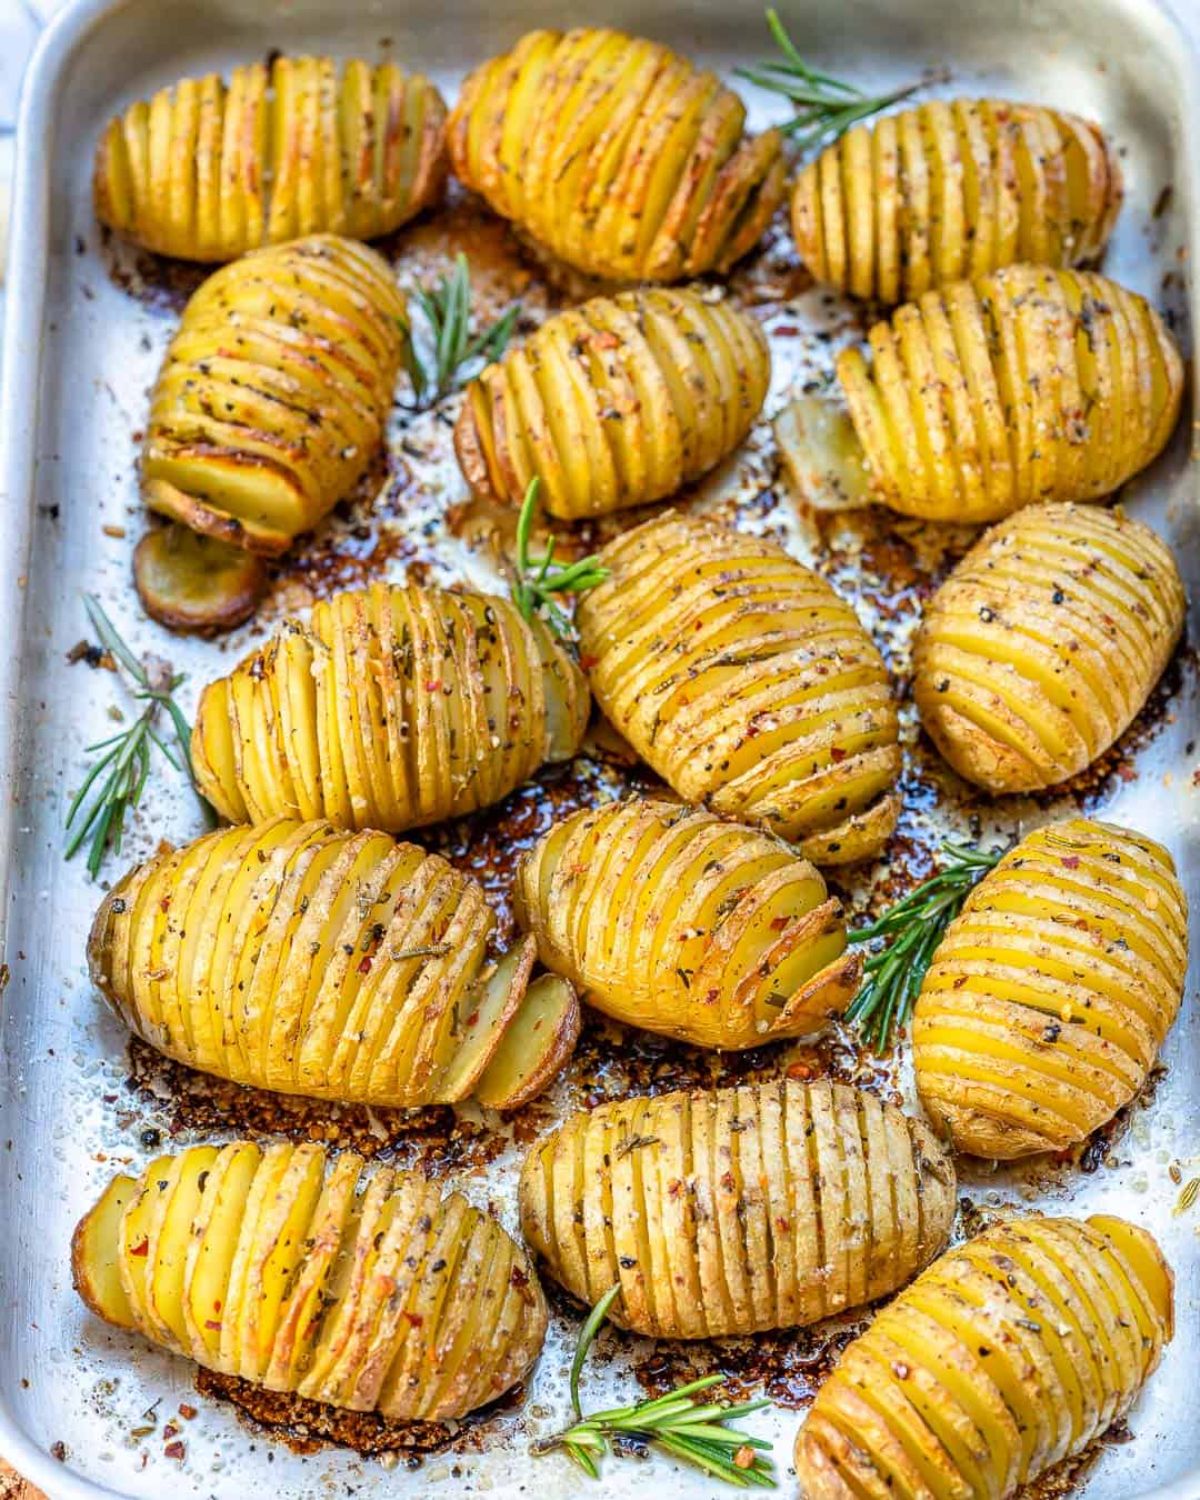 Mouth-watering Garlic Butter Baked Hasselback Potatoes on a baking tray.